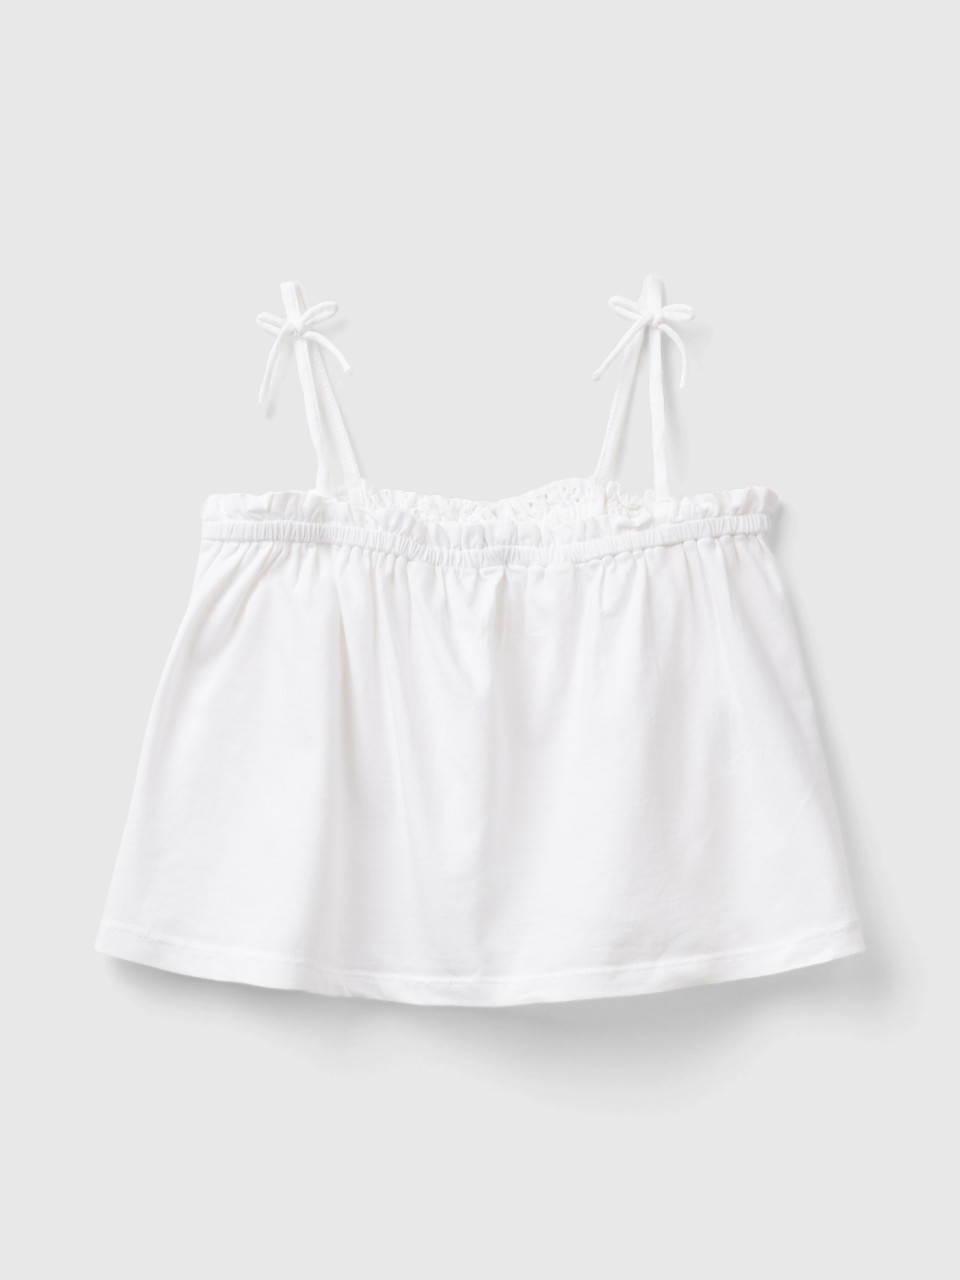 Benetton, Top With Broderie Anglaise Details, White, Kids